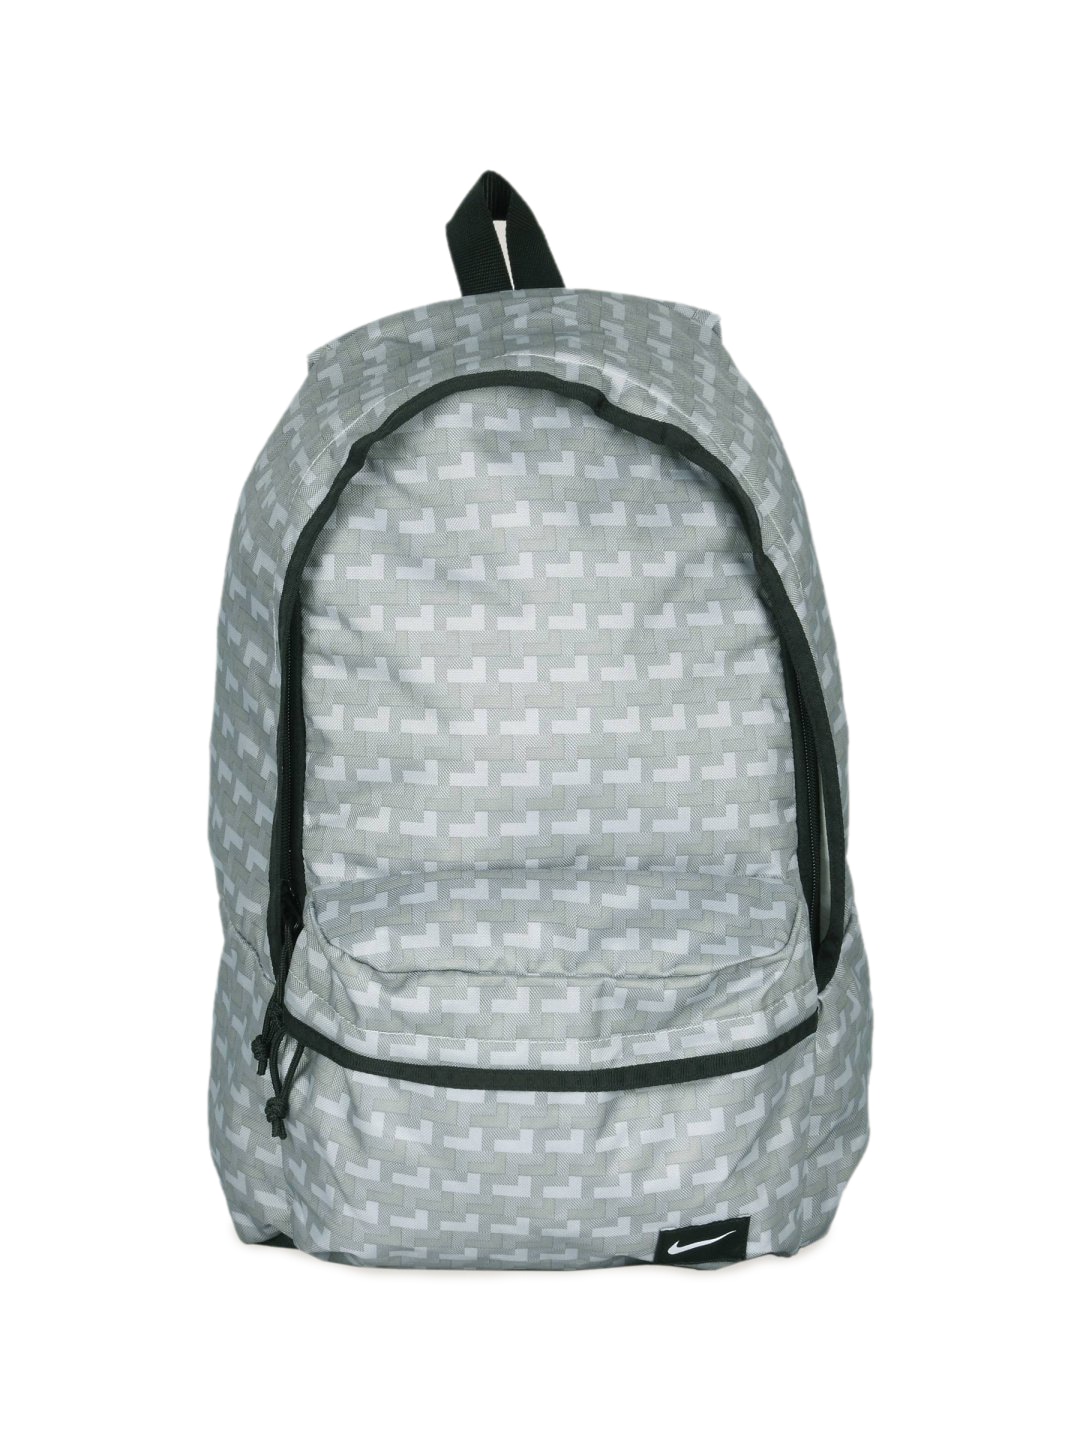 Nike Unisex All Access Grey Backpack